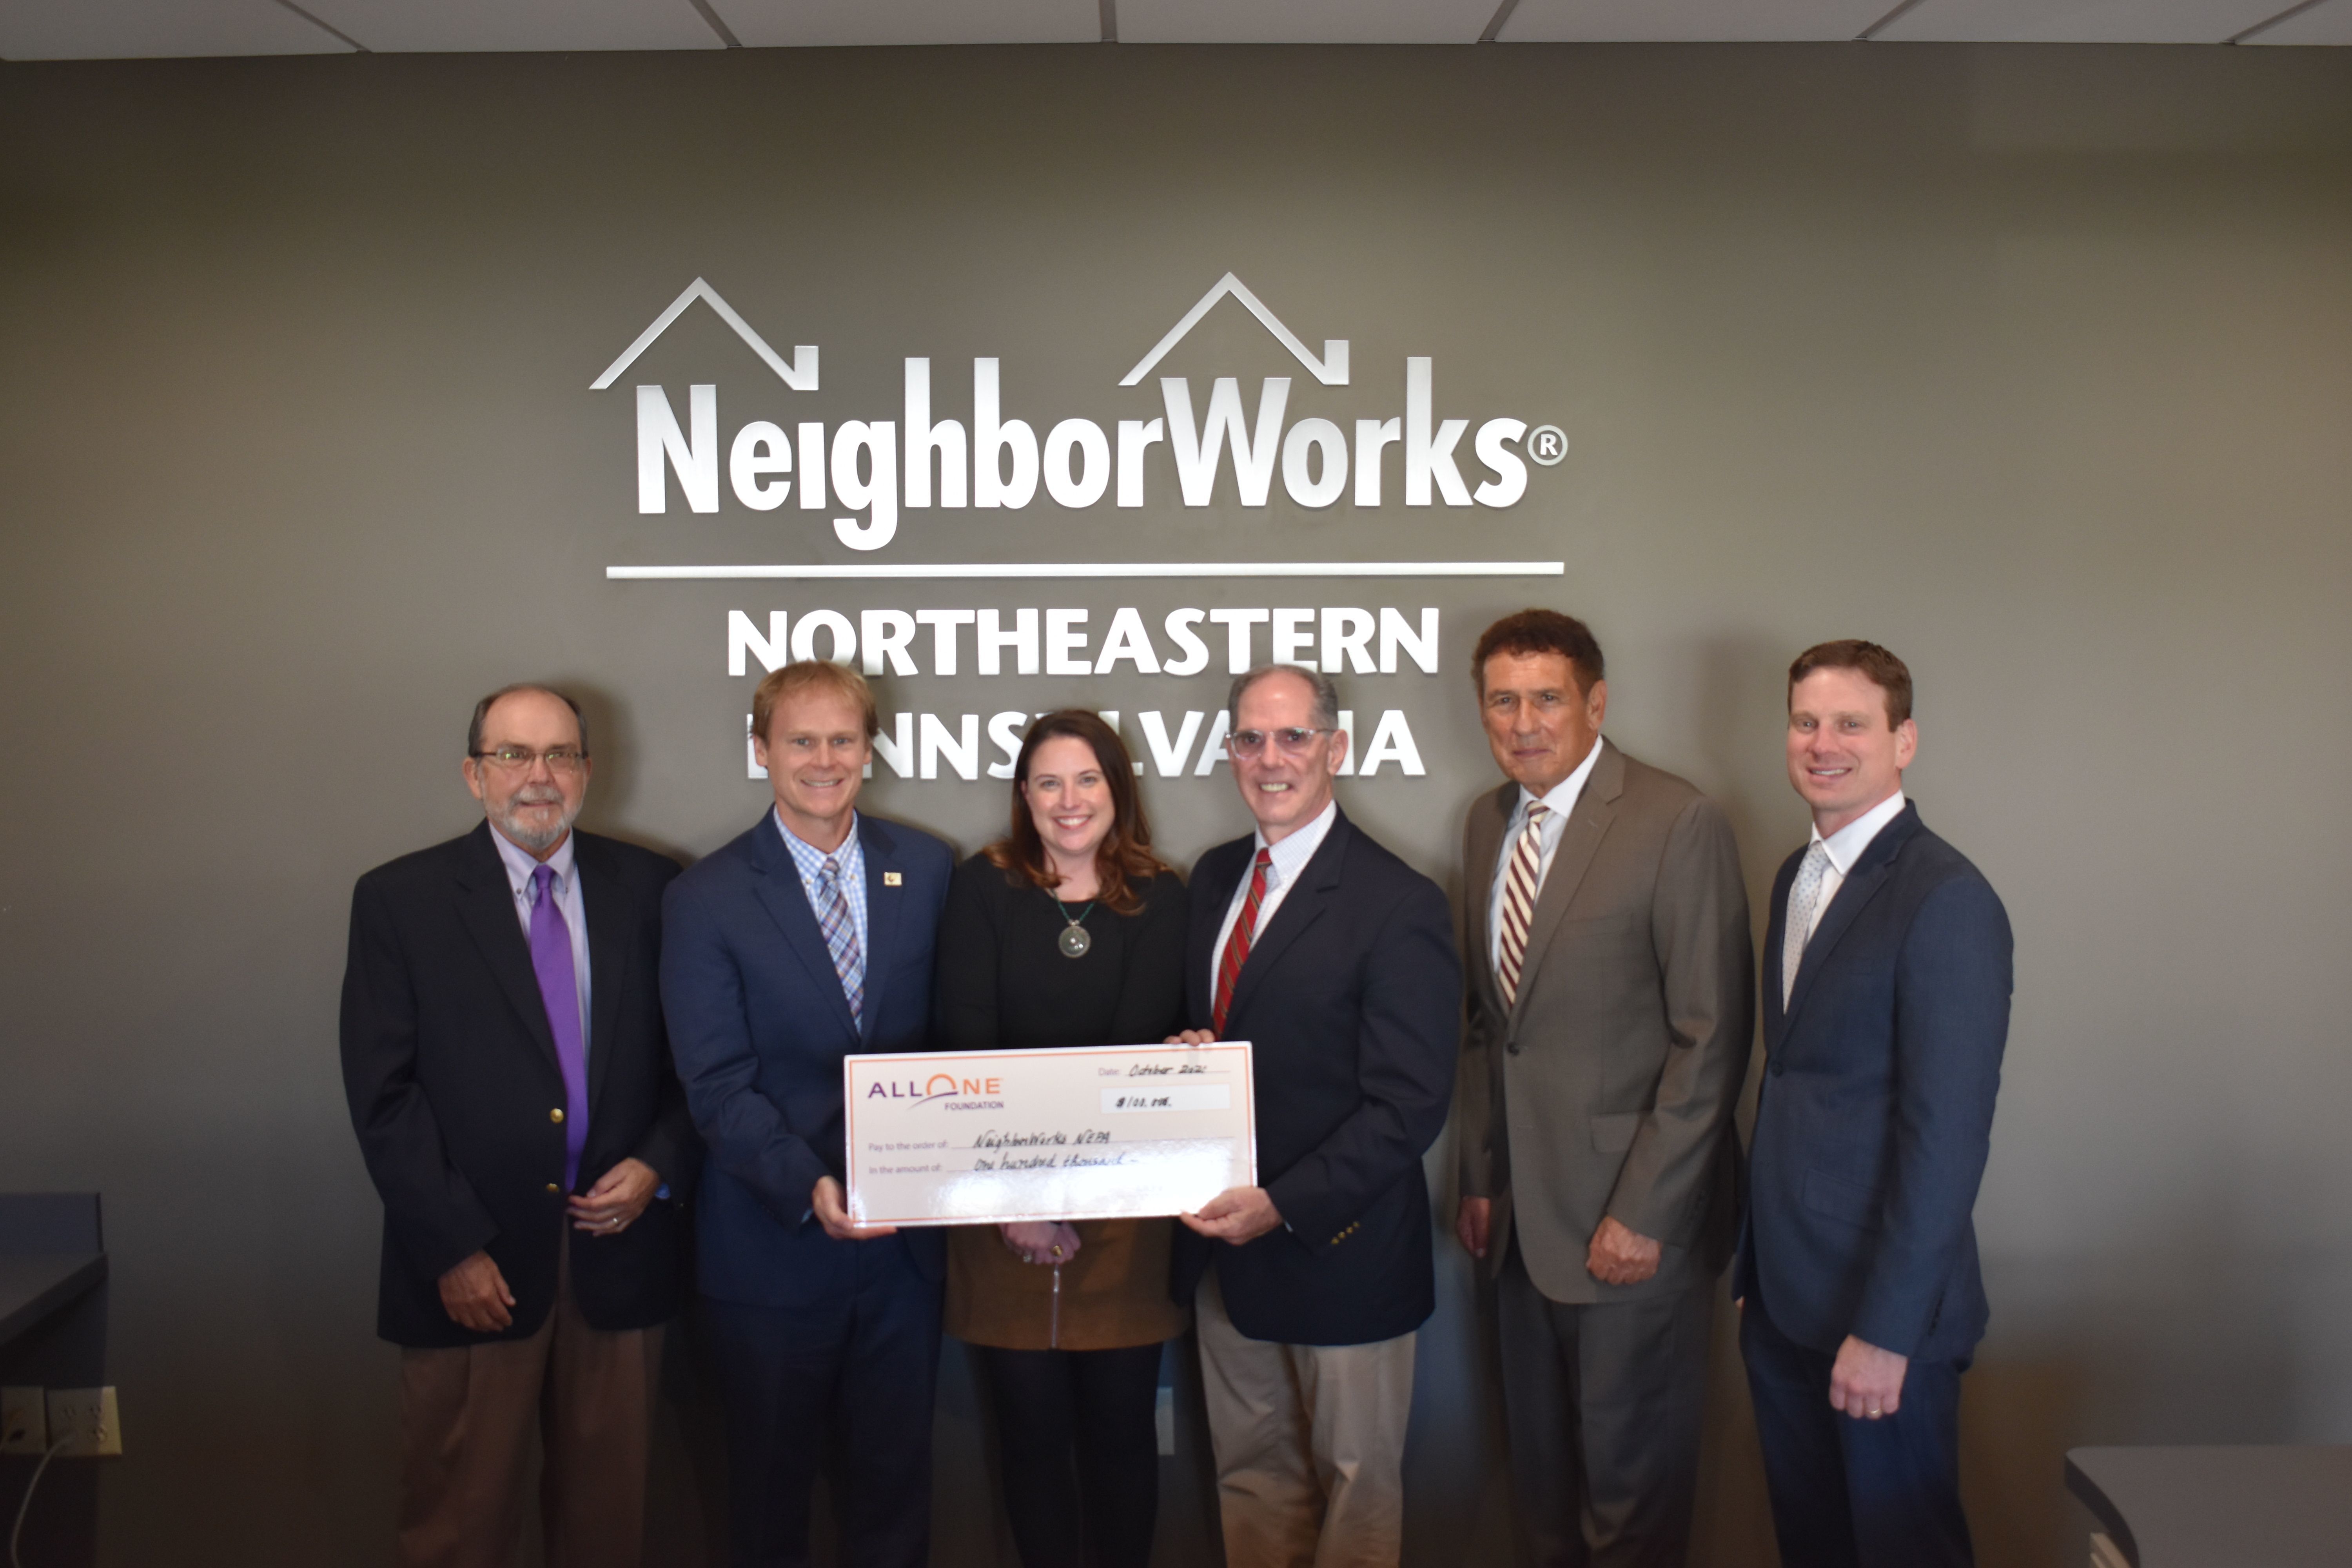 Pictured left to right: John Menapace, Board Member, AllOne Foundation & Charities; Teddy Michel, Director, Ignatian Volunteer Corps of Northeastern Pennsylvania; Mary Endrusick, Aging in Place Coordinator, NeighborWorks; John Cosgrove, Executive Director